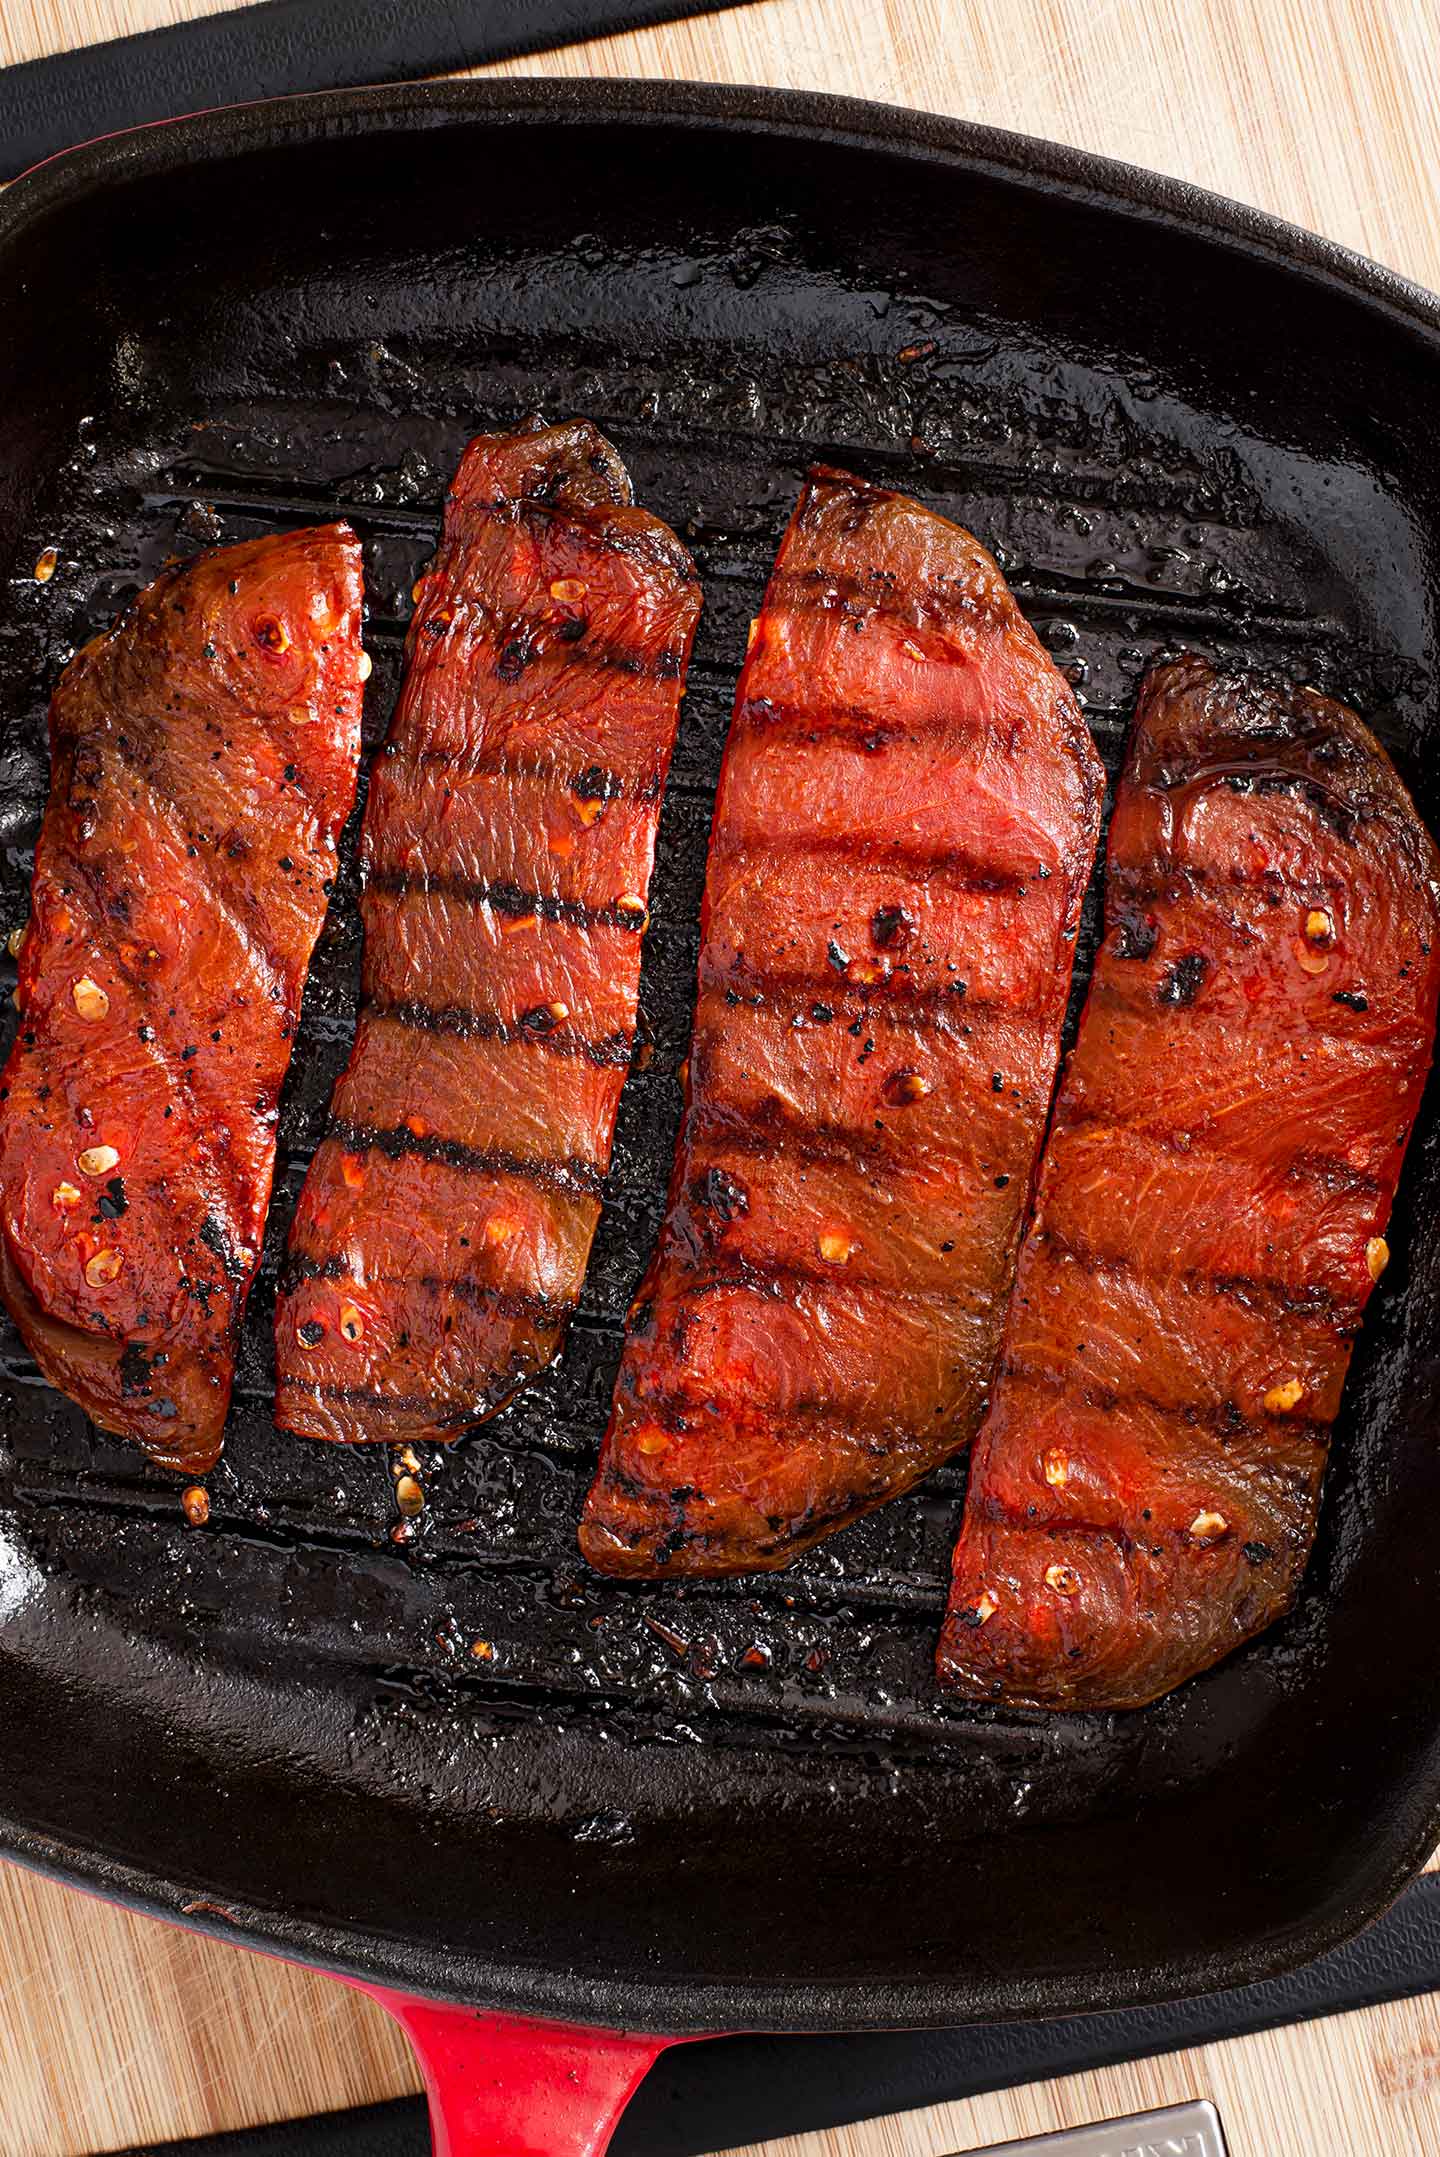 Top down view of watermelon steaks on a hot grill with grill lines seared into the fruit.